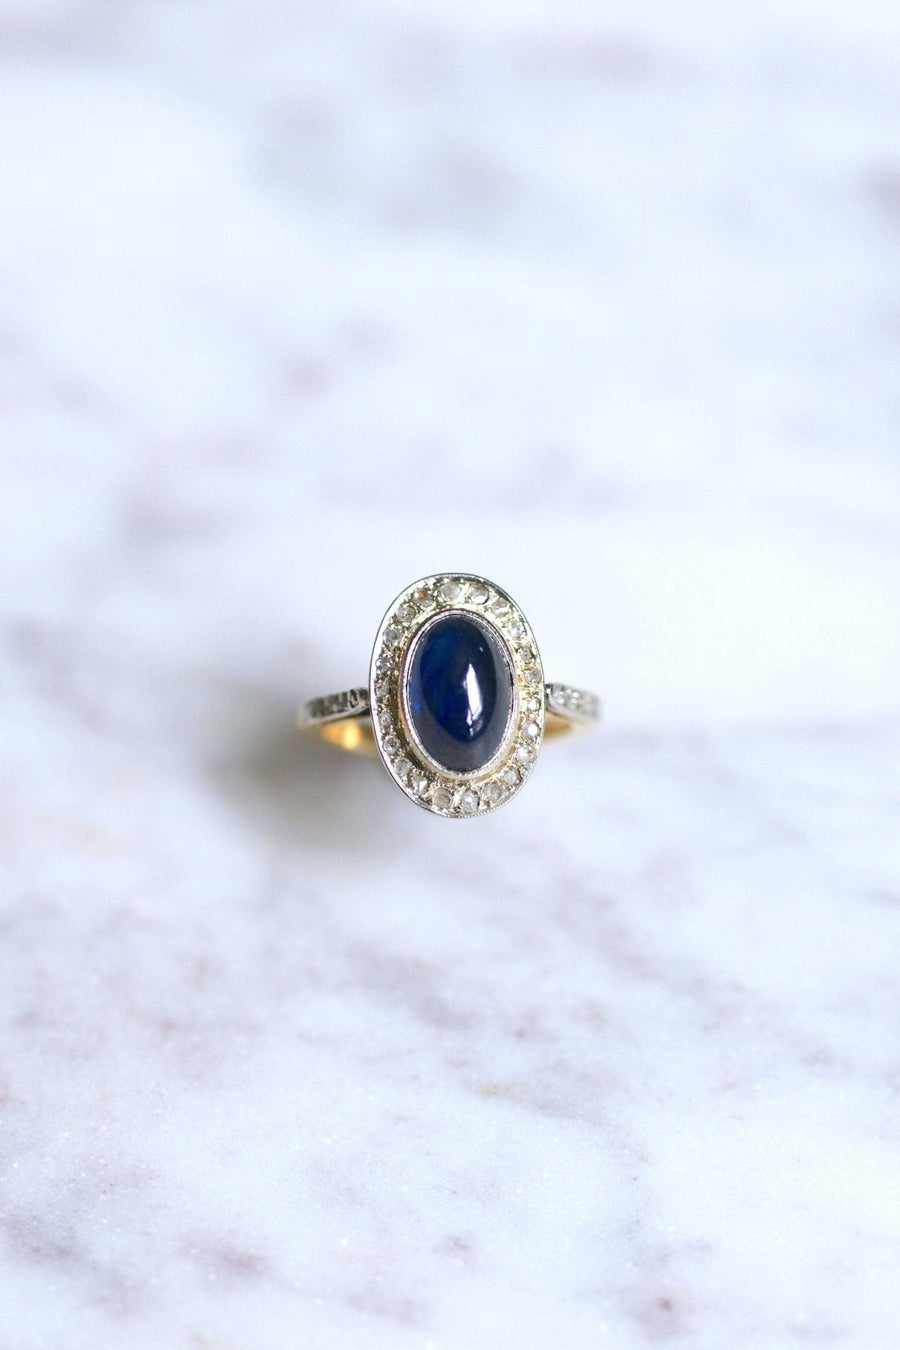 Belle Epoque sapphire cabochon ring 3.50 Cts surrounded by diamonds on gold - Galerie Pénélope